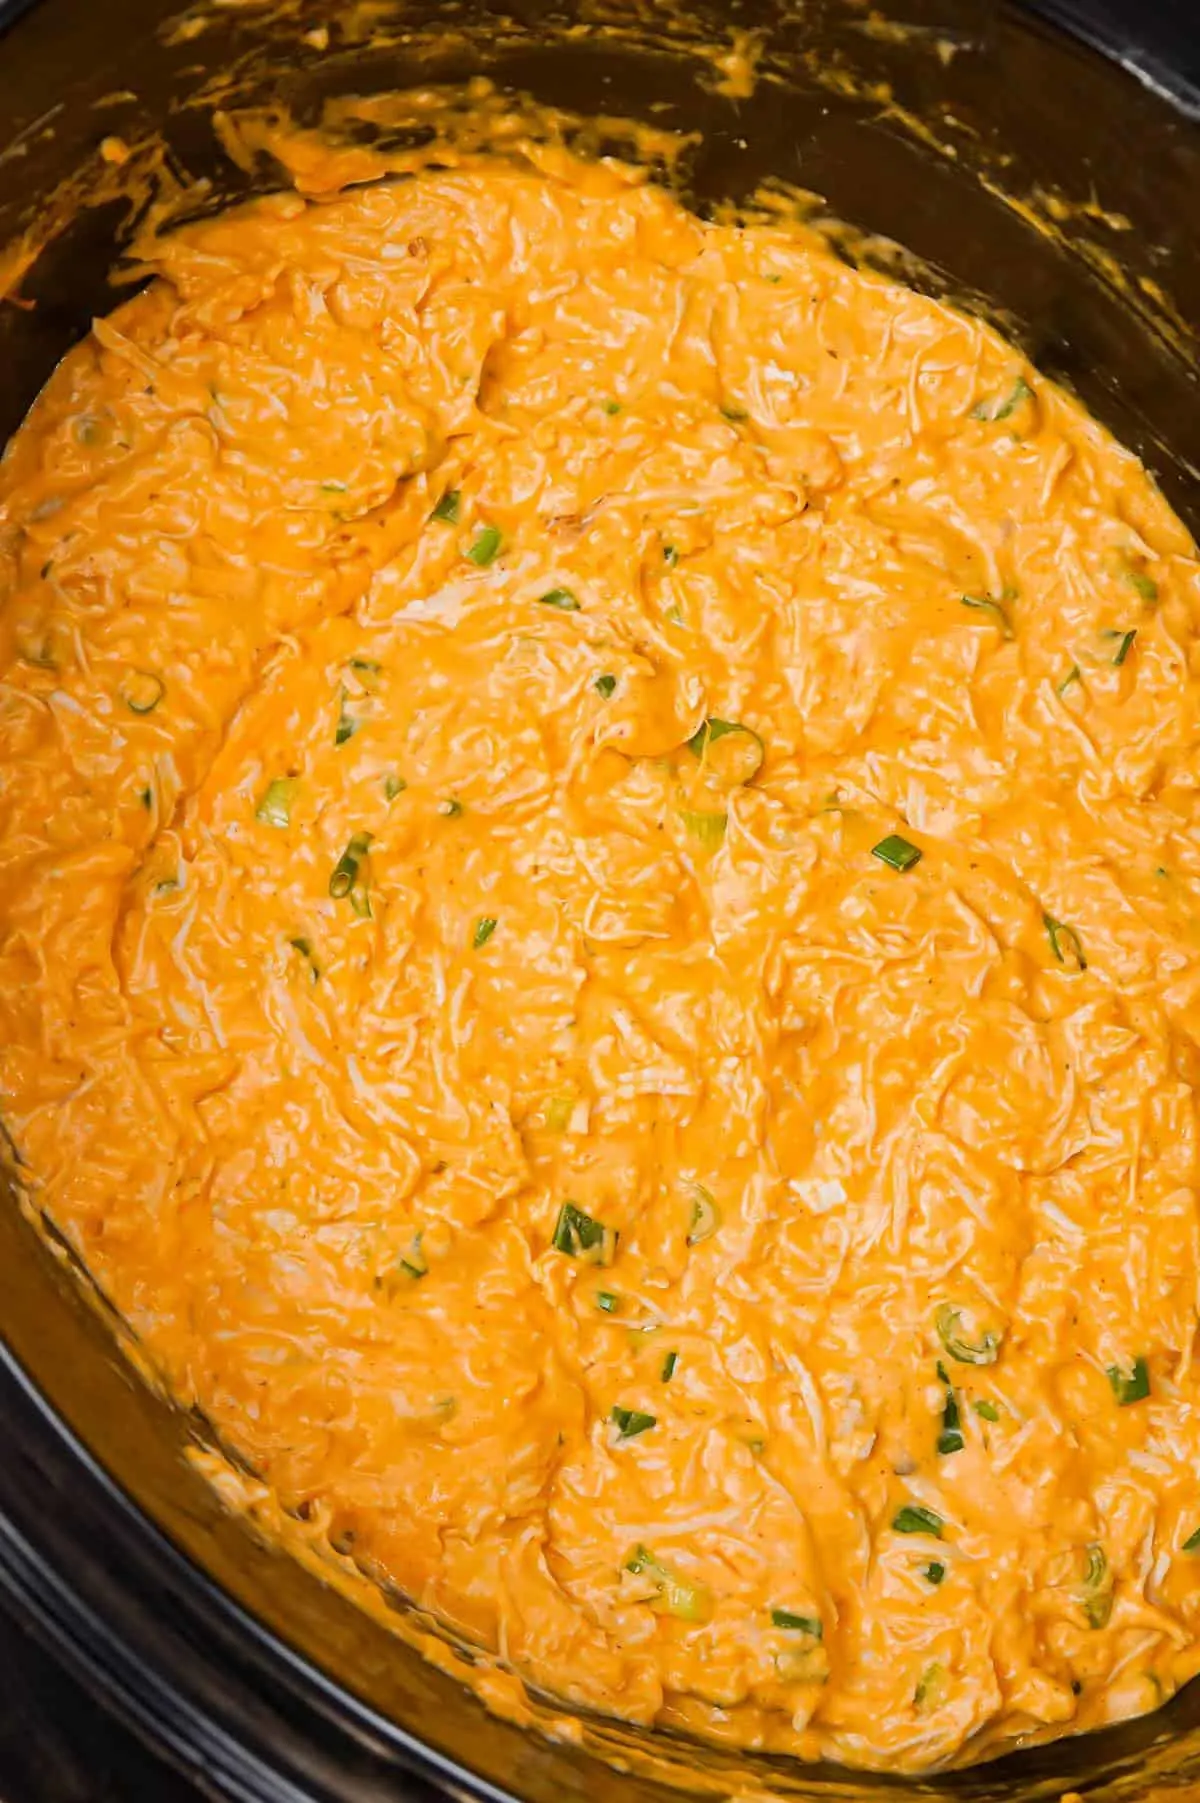 Crock Pot Buffalo Chicken Dip is a delicious hot party dip recipe loaded with shredded chicken, cream cheese, ranch dressing, shredded cheese and Buffalo sauce.